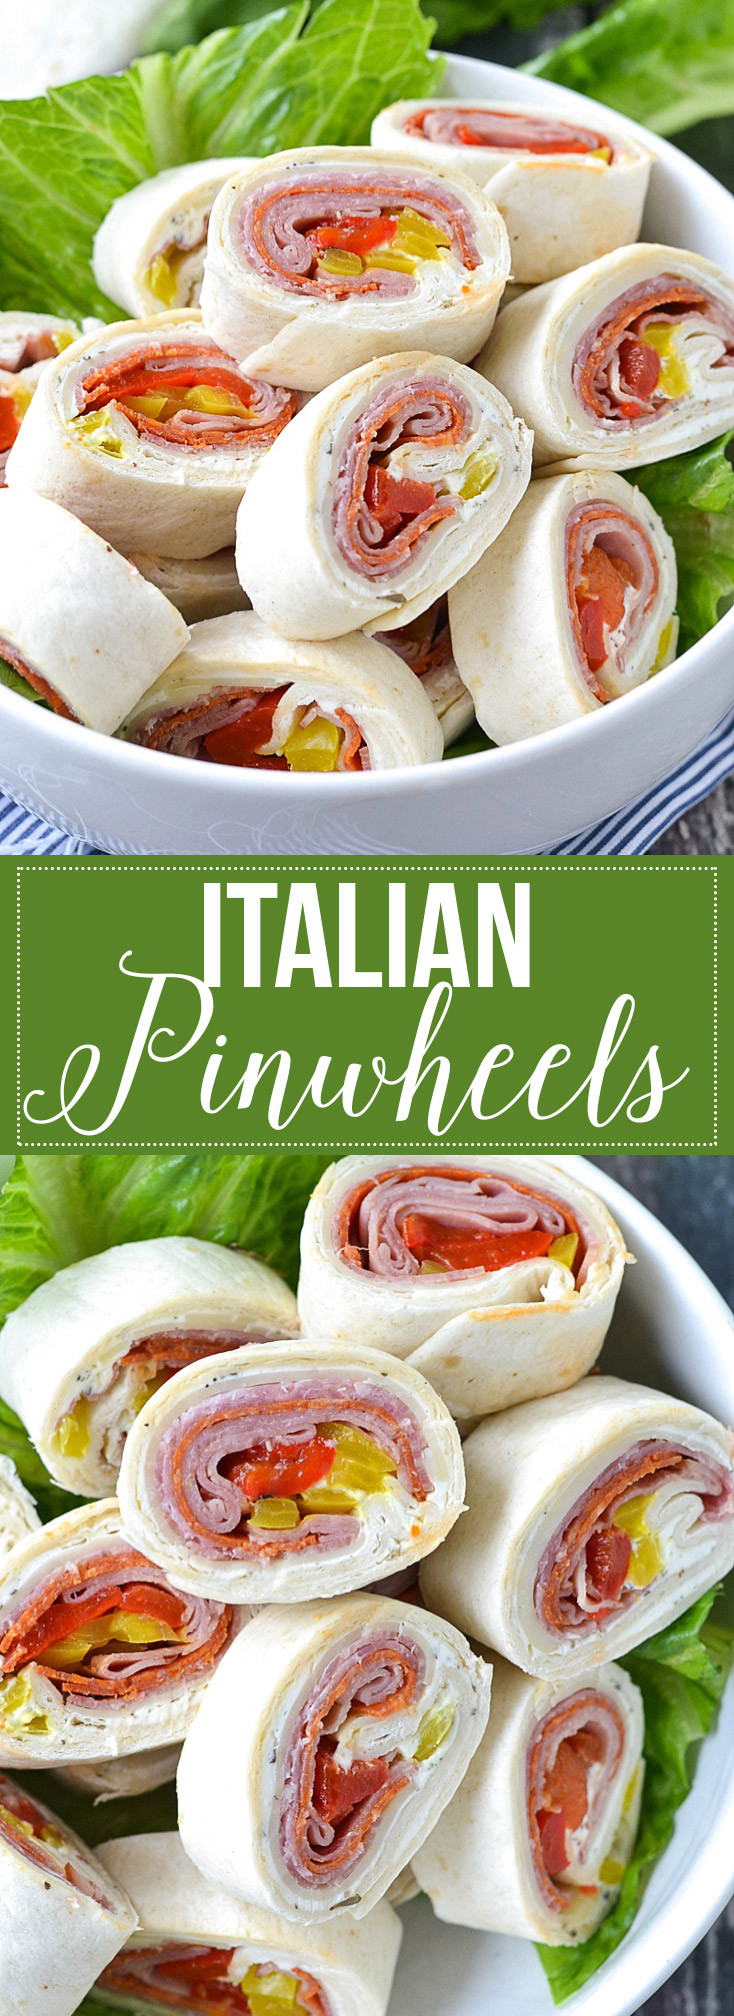 Italian Appetizers For Party
 Italian Pinwheels Mother Thyme